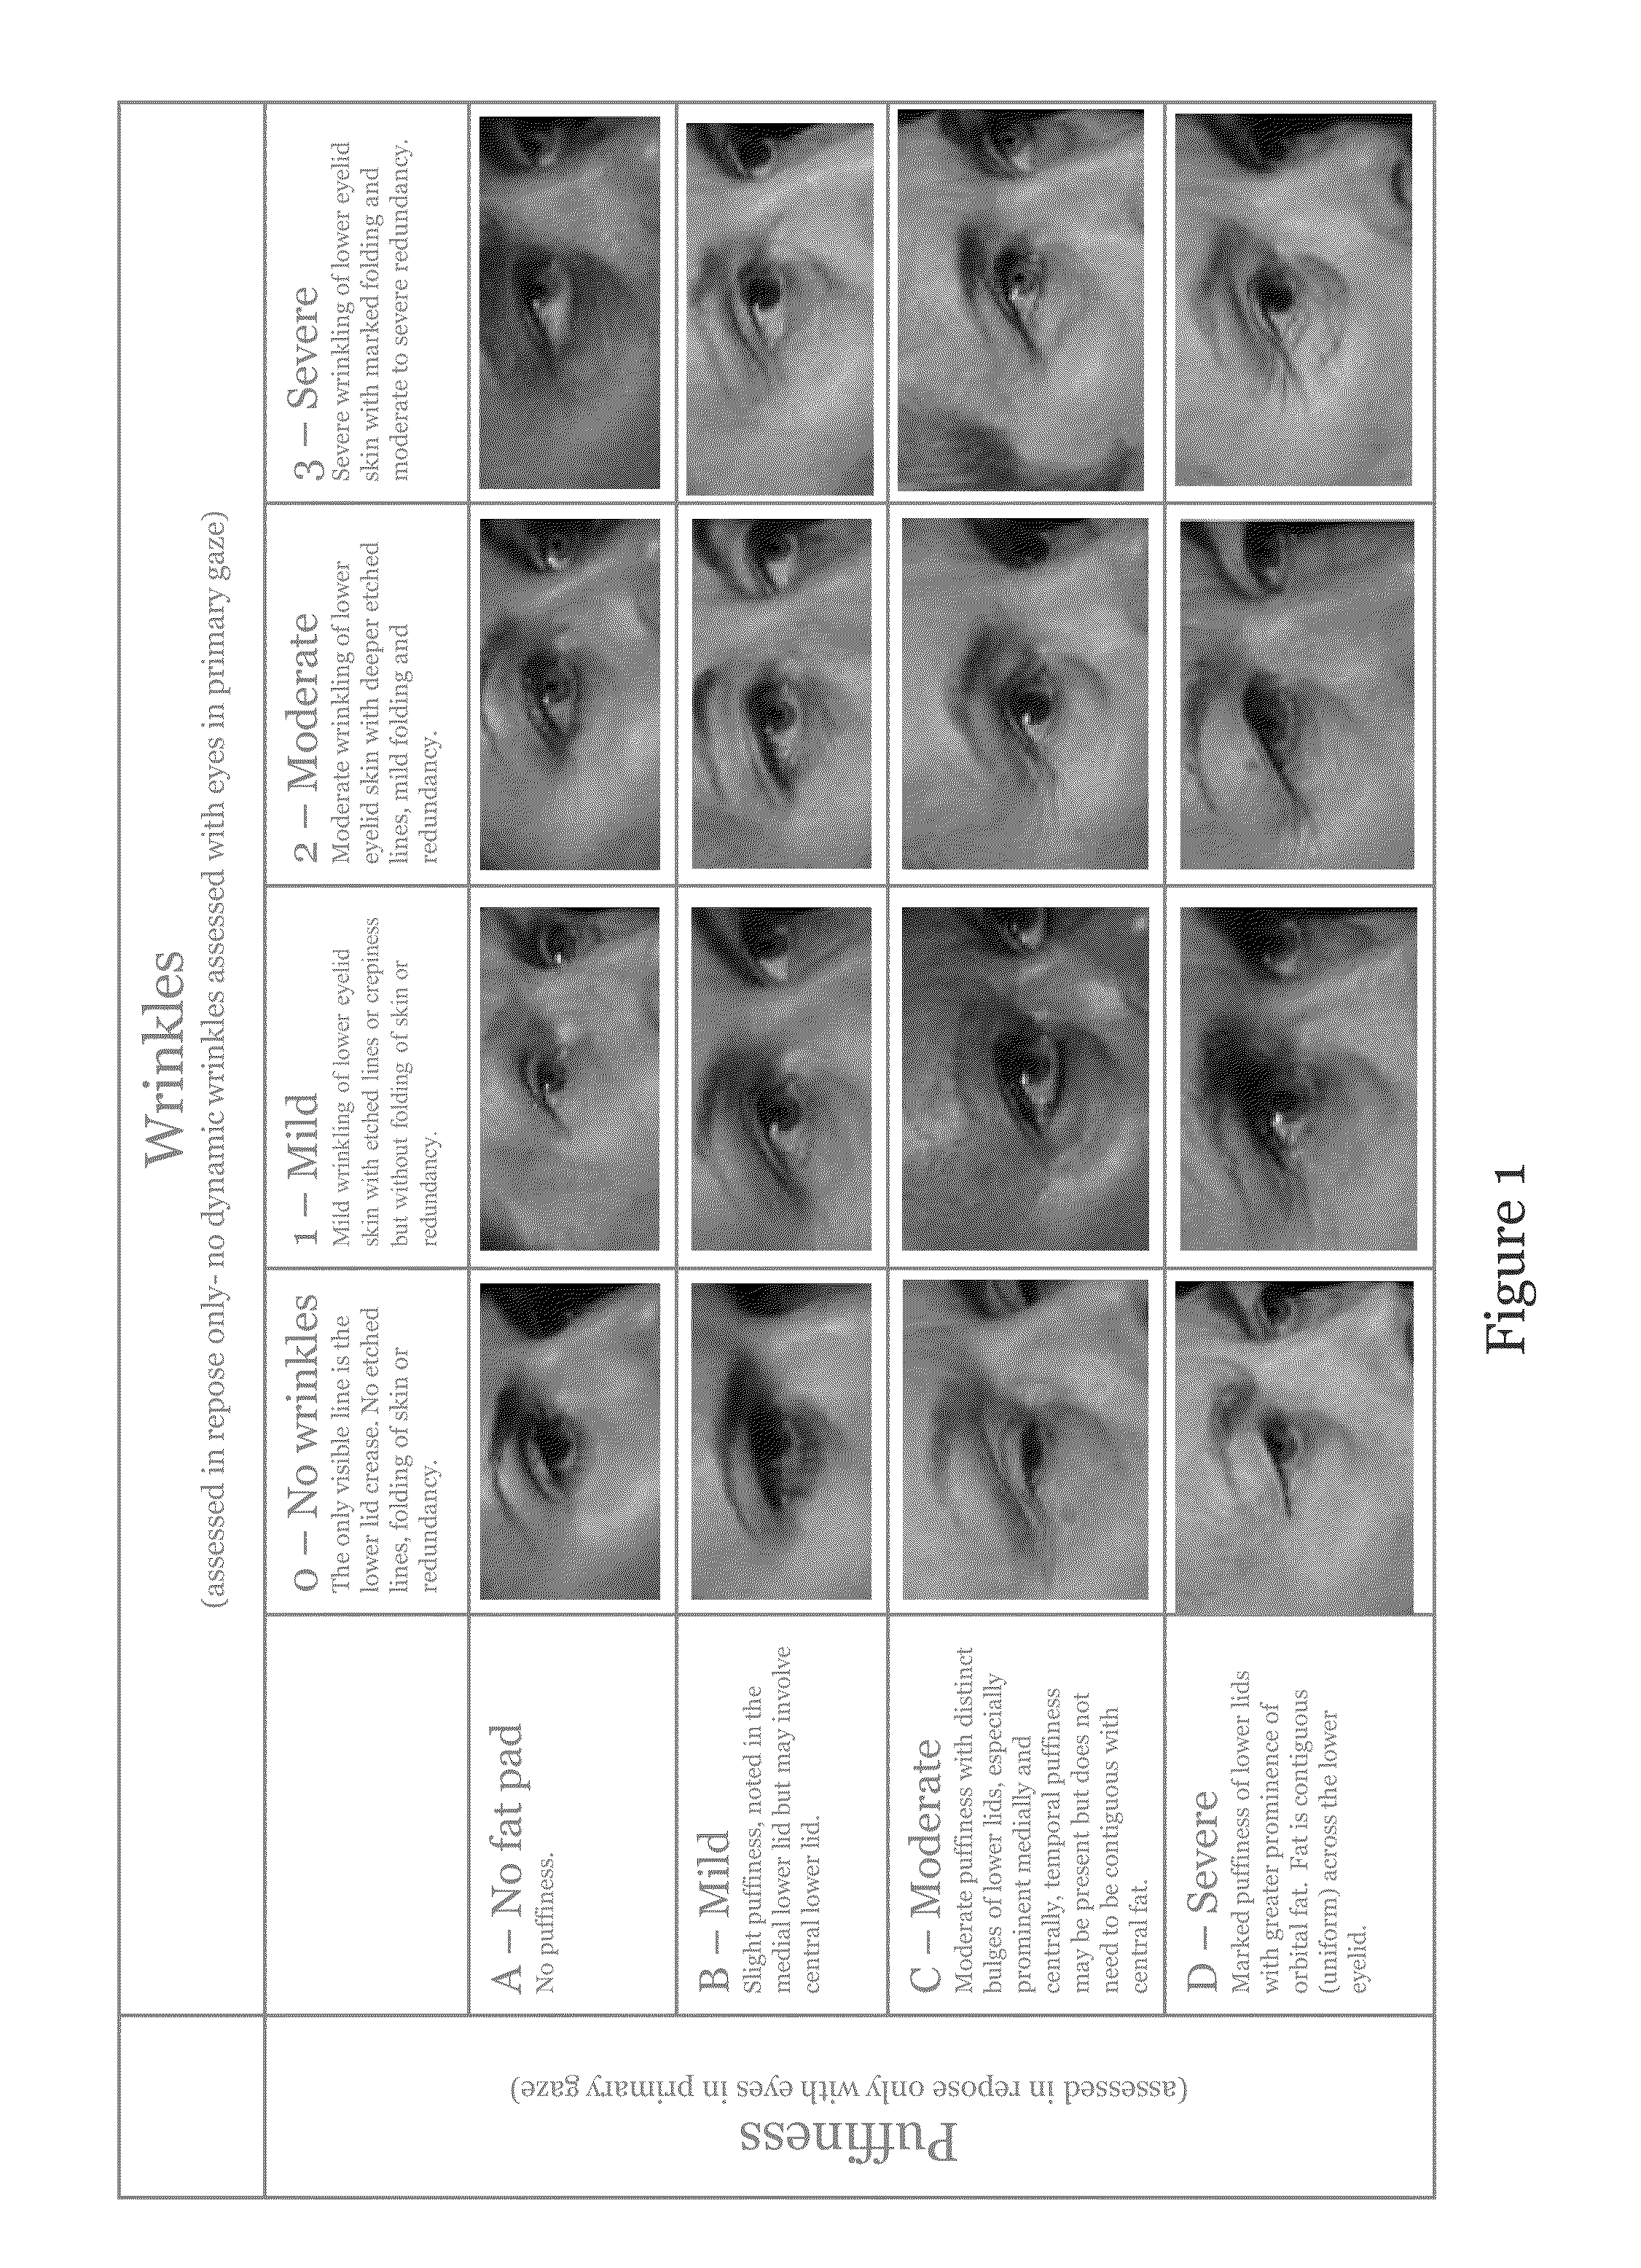 Scale and associated metric for treatment of facial wrinkles and related conditions